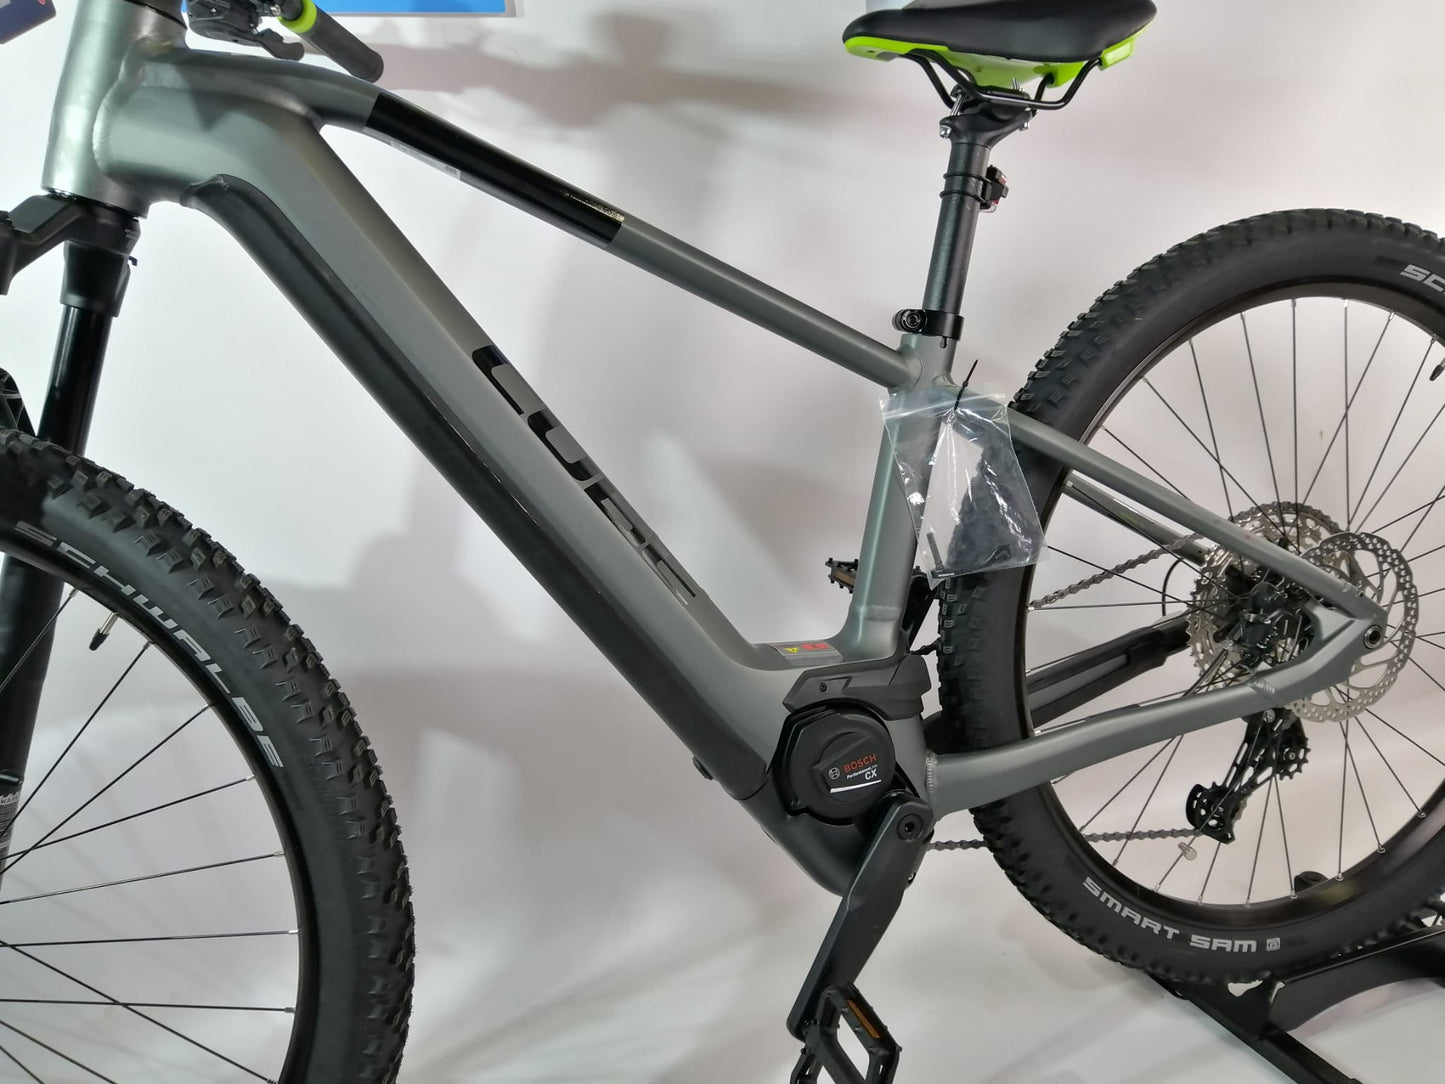 NIEUW Cube EMTB Reaction Pro HPA Boch Perf Line CX Middenmotor LED Remote Smart System